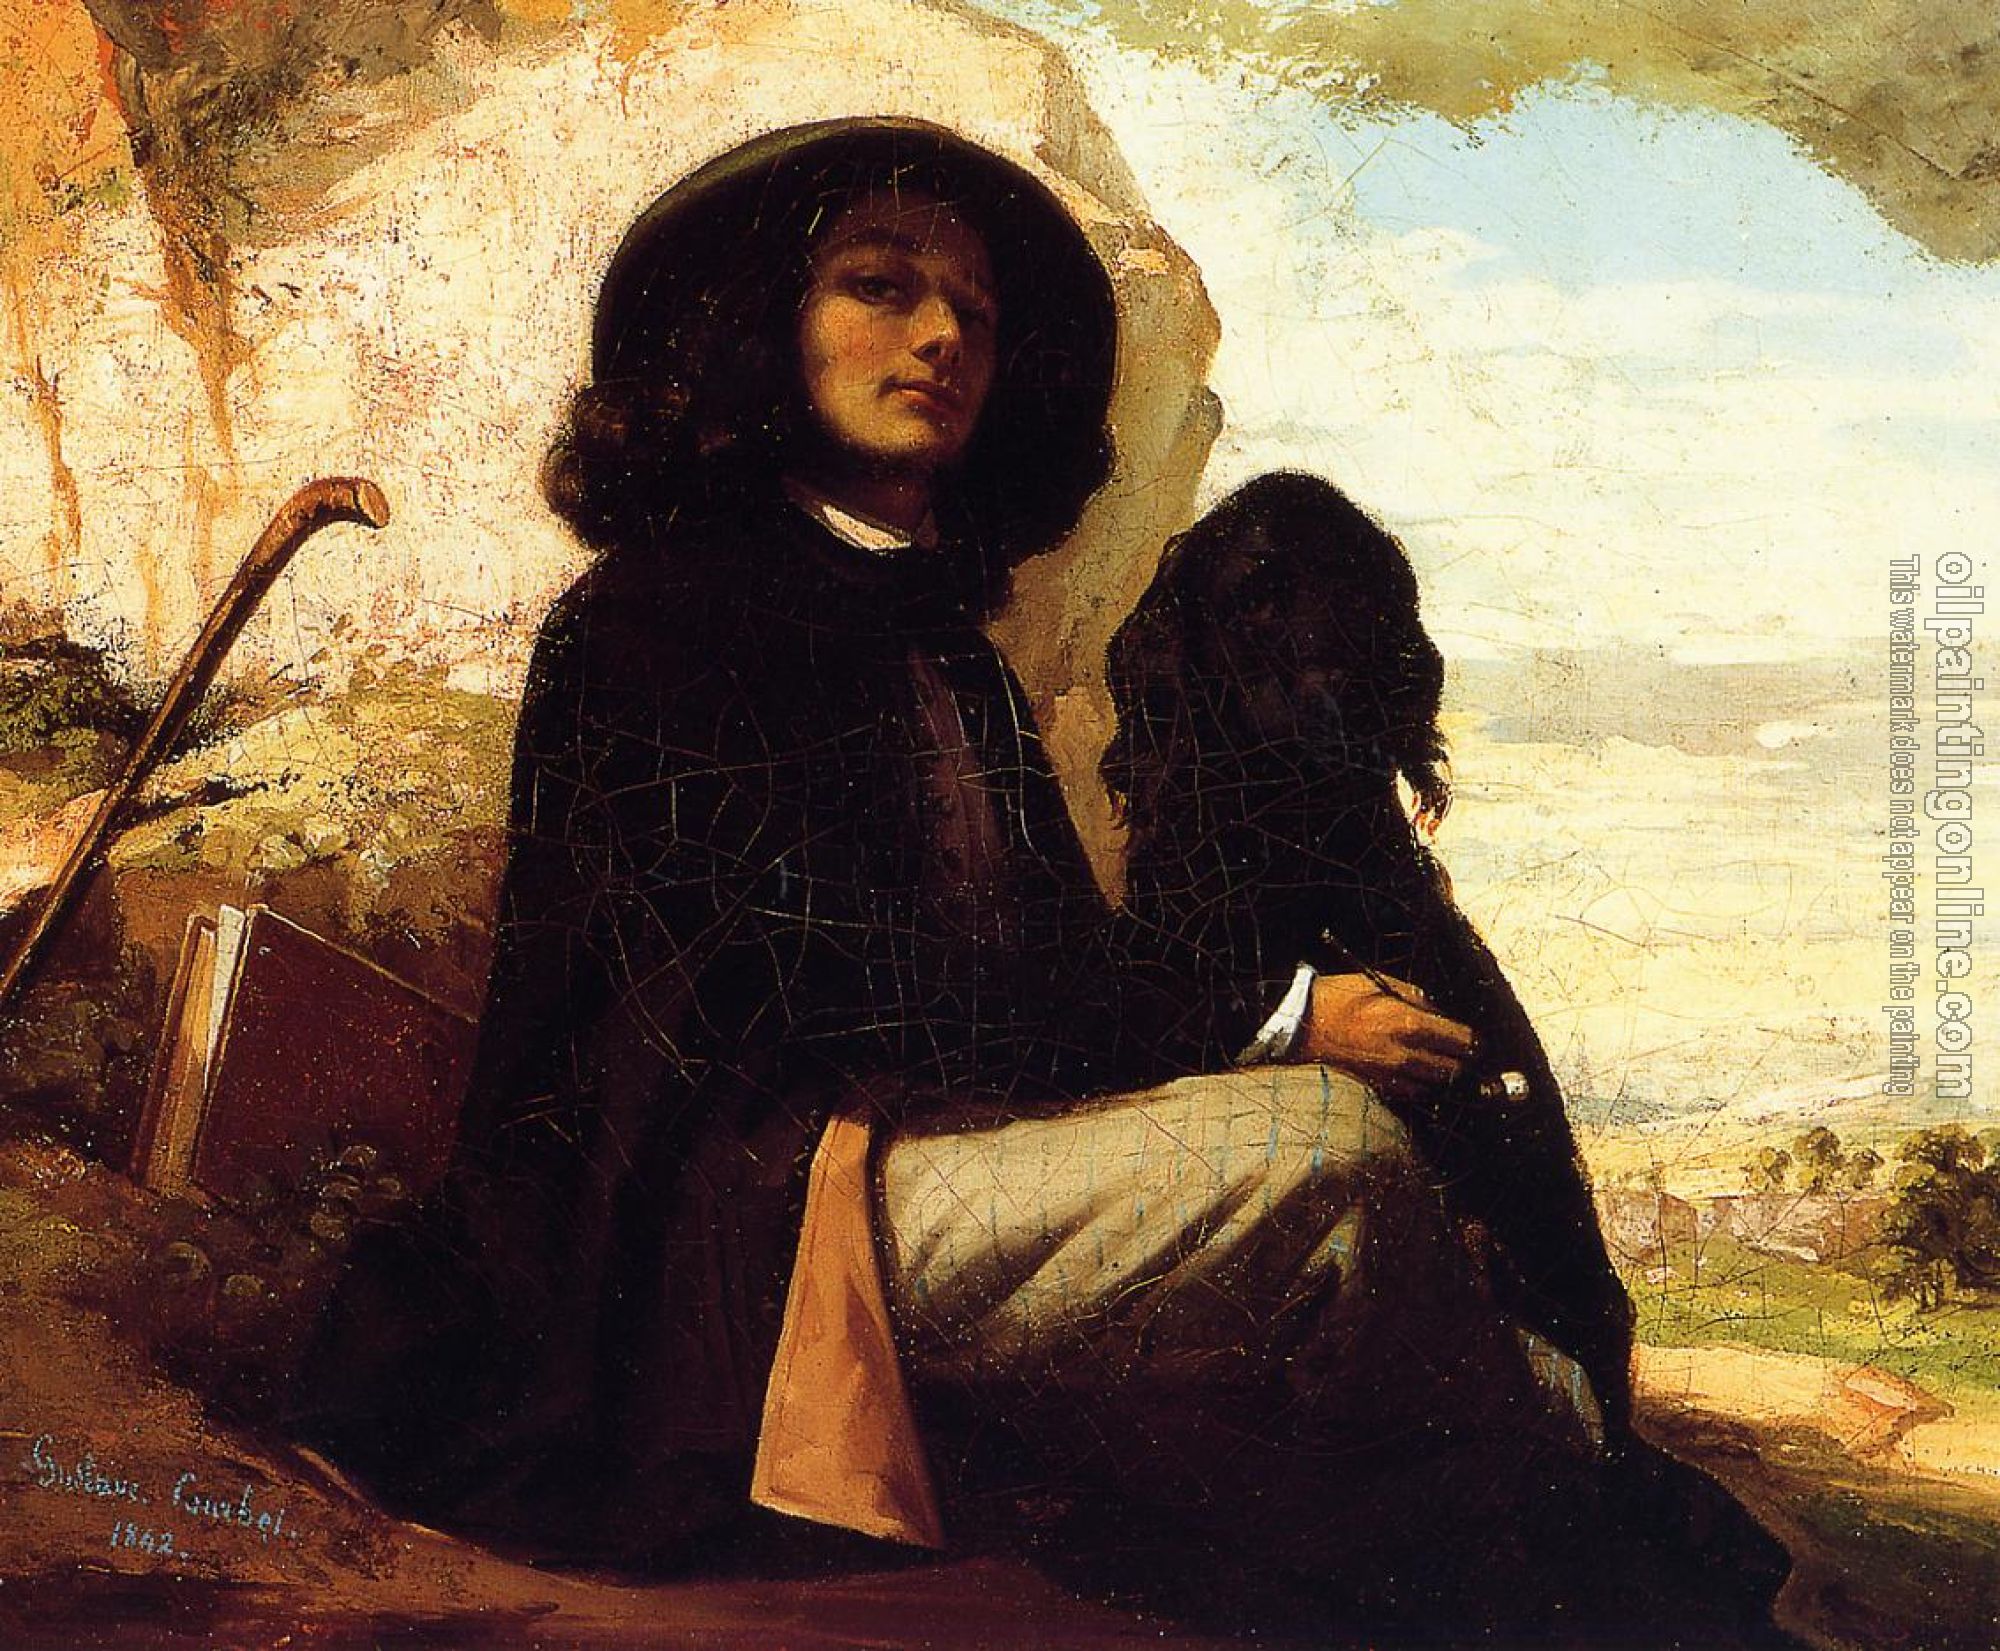 Courbet, Gustave - Self Portrait with a Black Dog